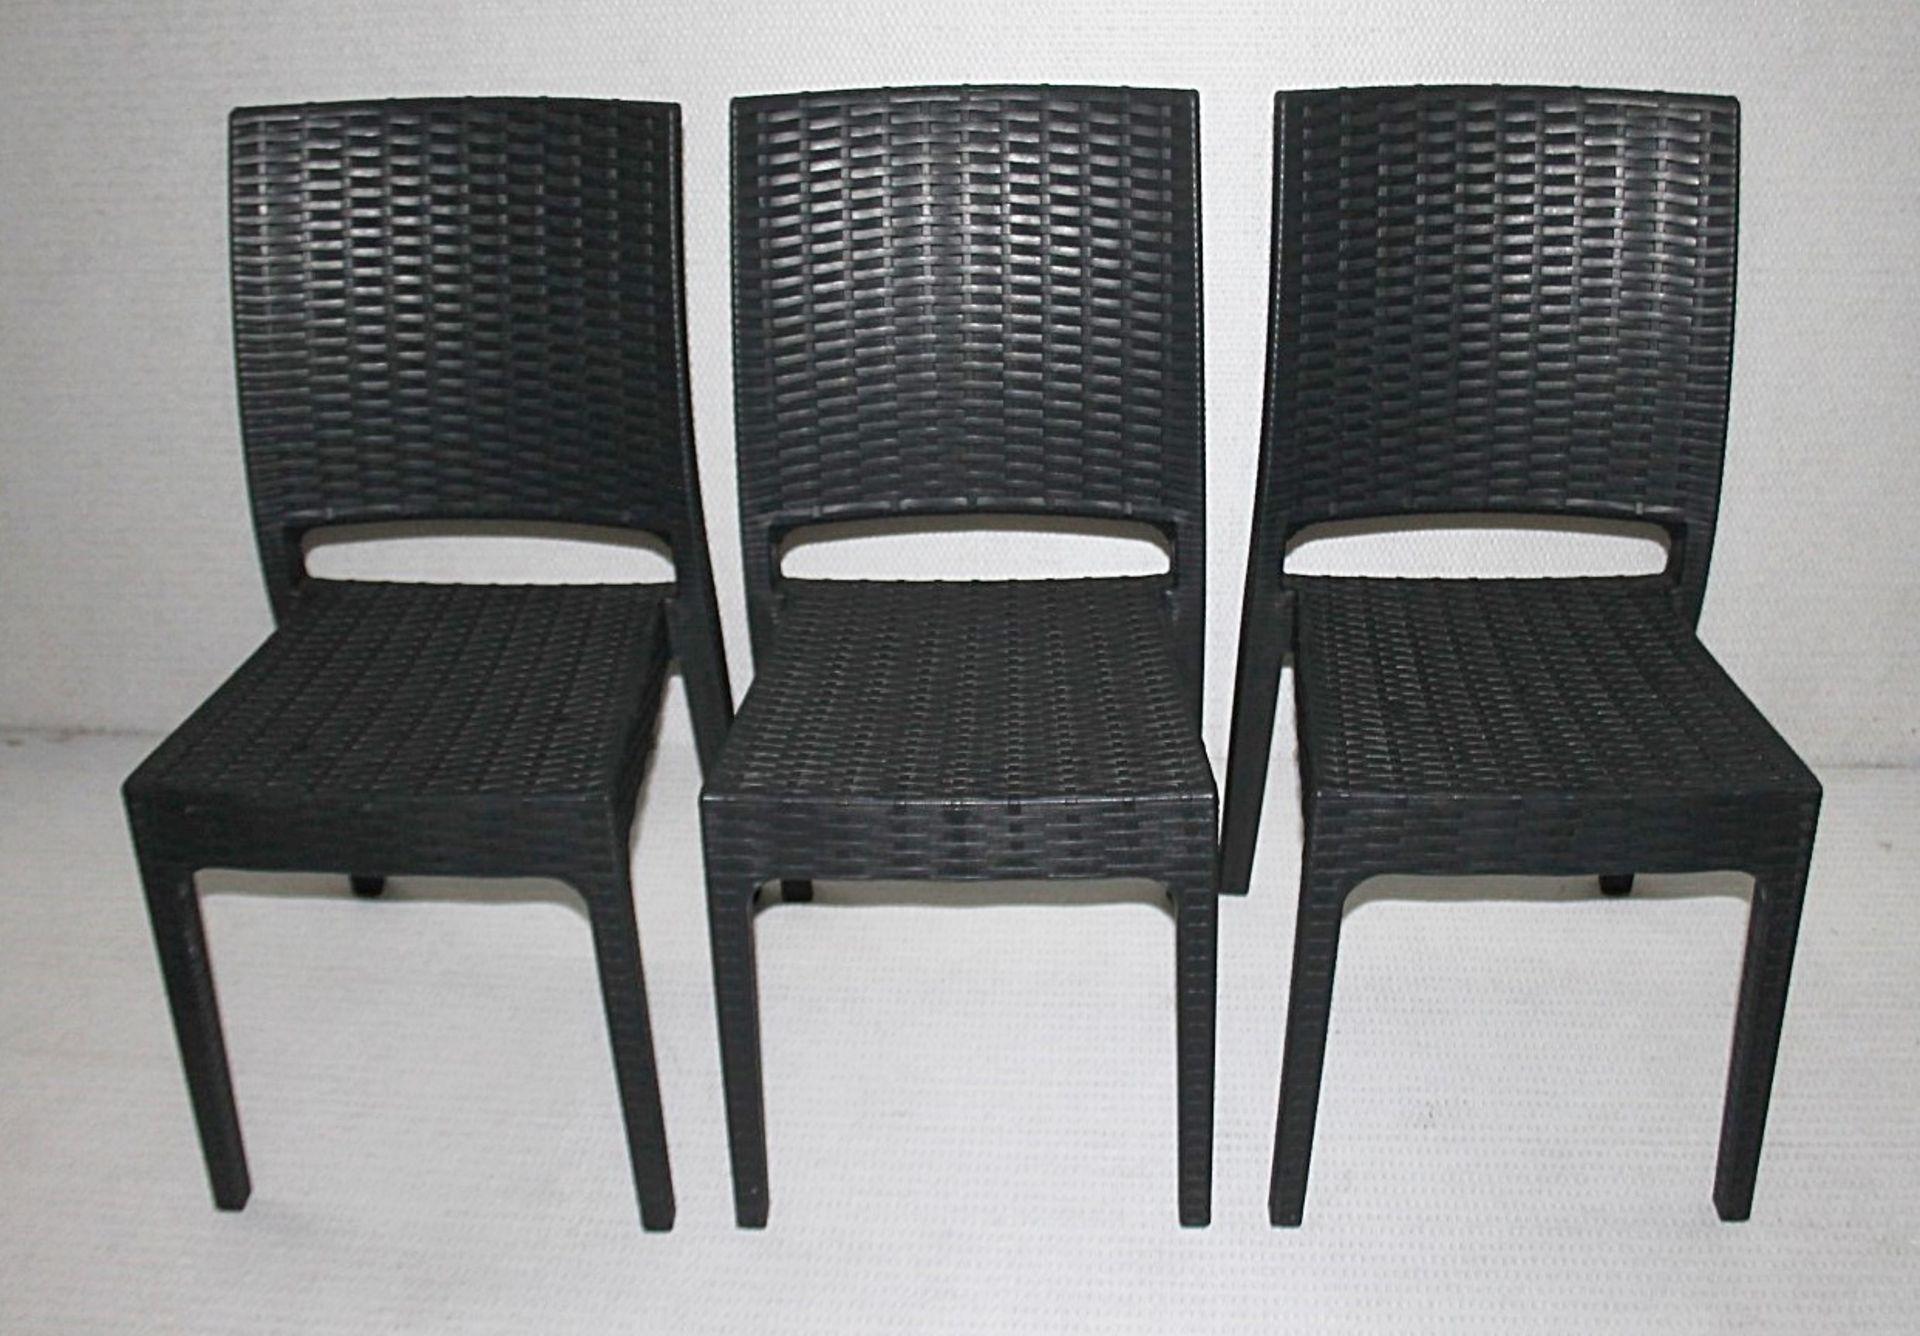 8 x SIESTA EXCLUSIVE 'Florida' Commercial Stackable Rattan-style Chairs In Dark Grey -CL987 - - Image 8 of 13